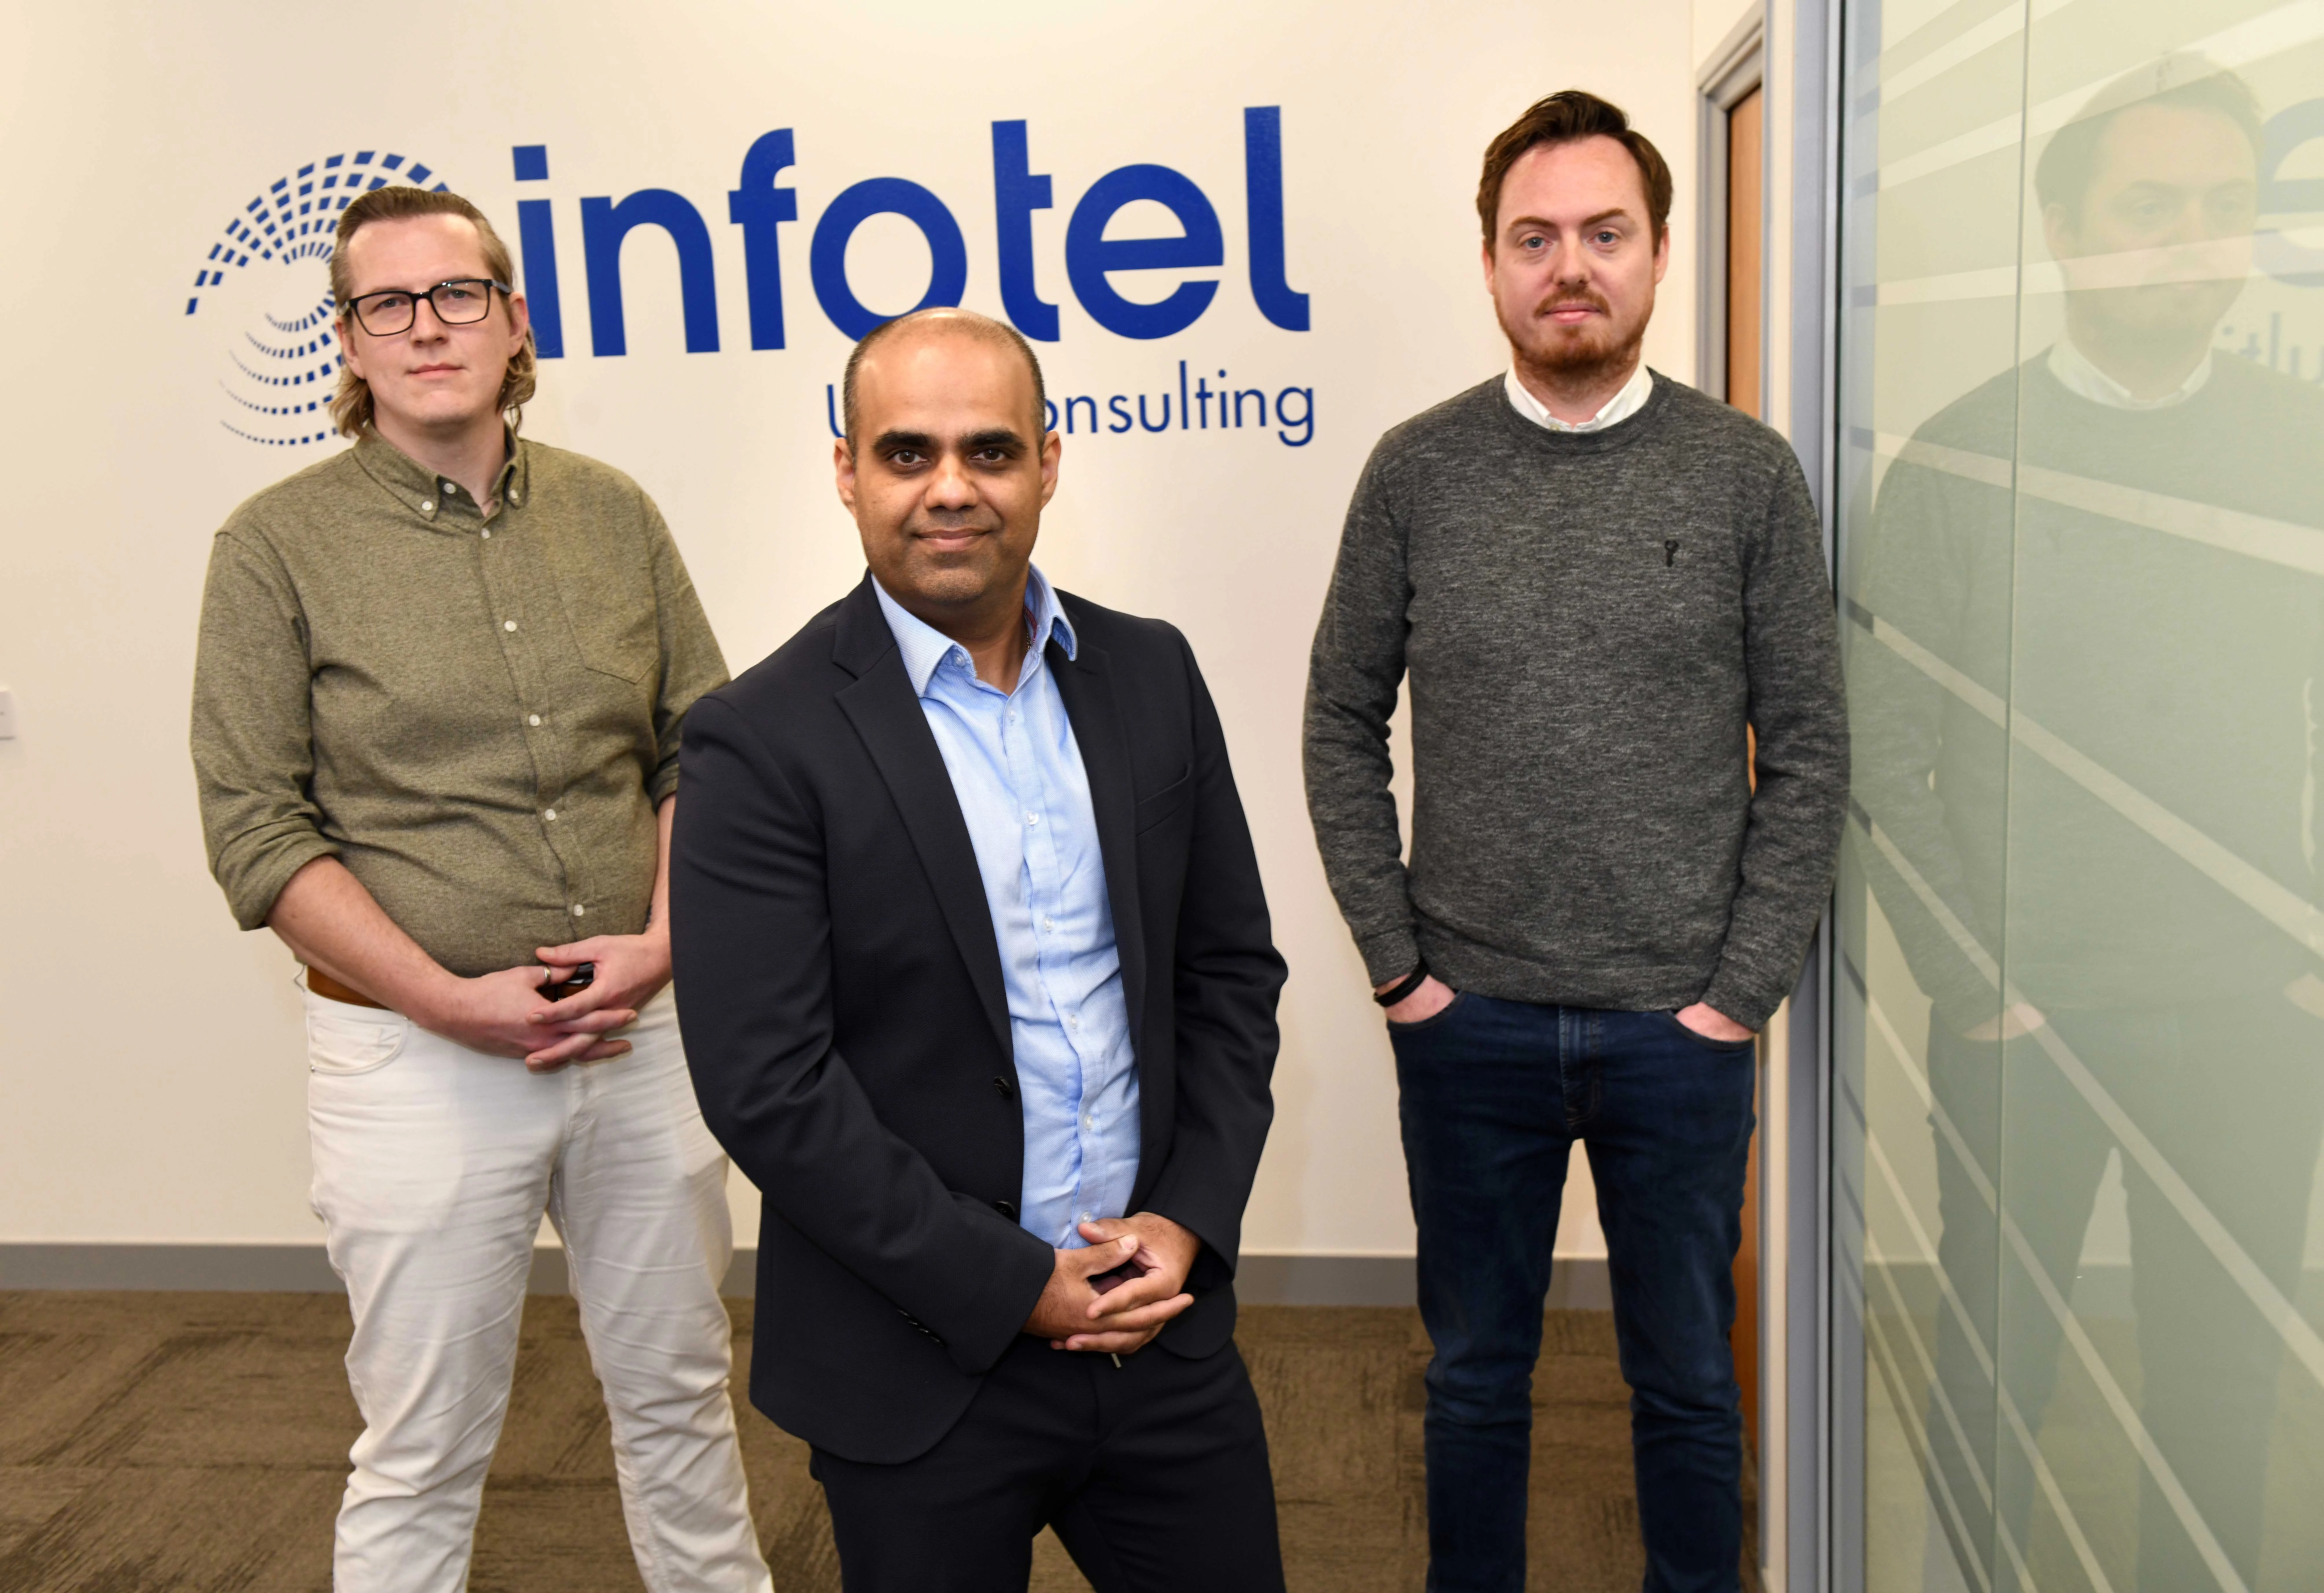 (L-R) Deepeo project director Steve Armstrong, Infotel UK managing director Mundeep Nayyar and project manager Steve Lamb 